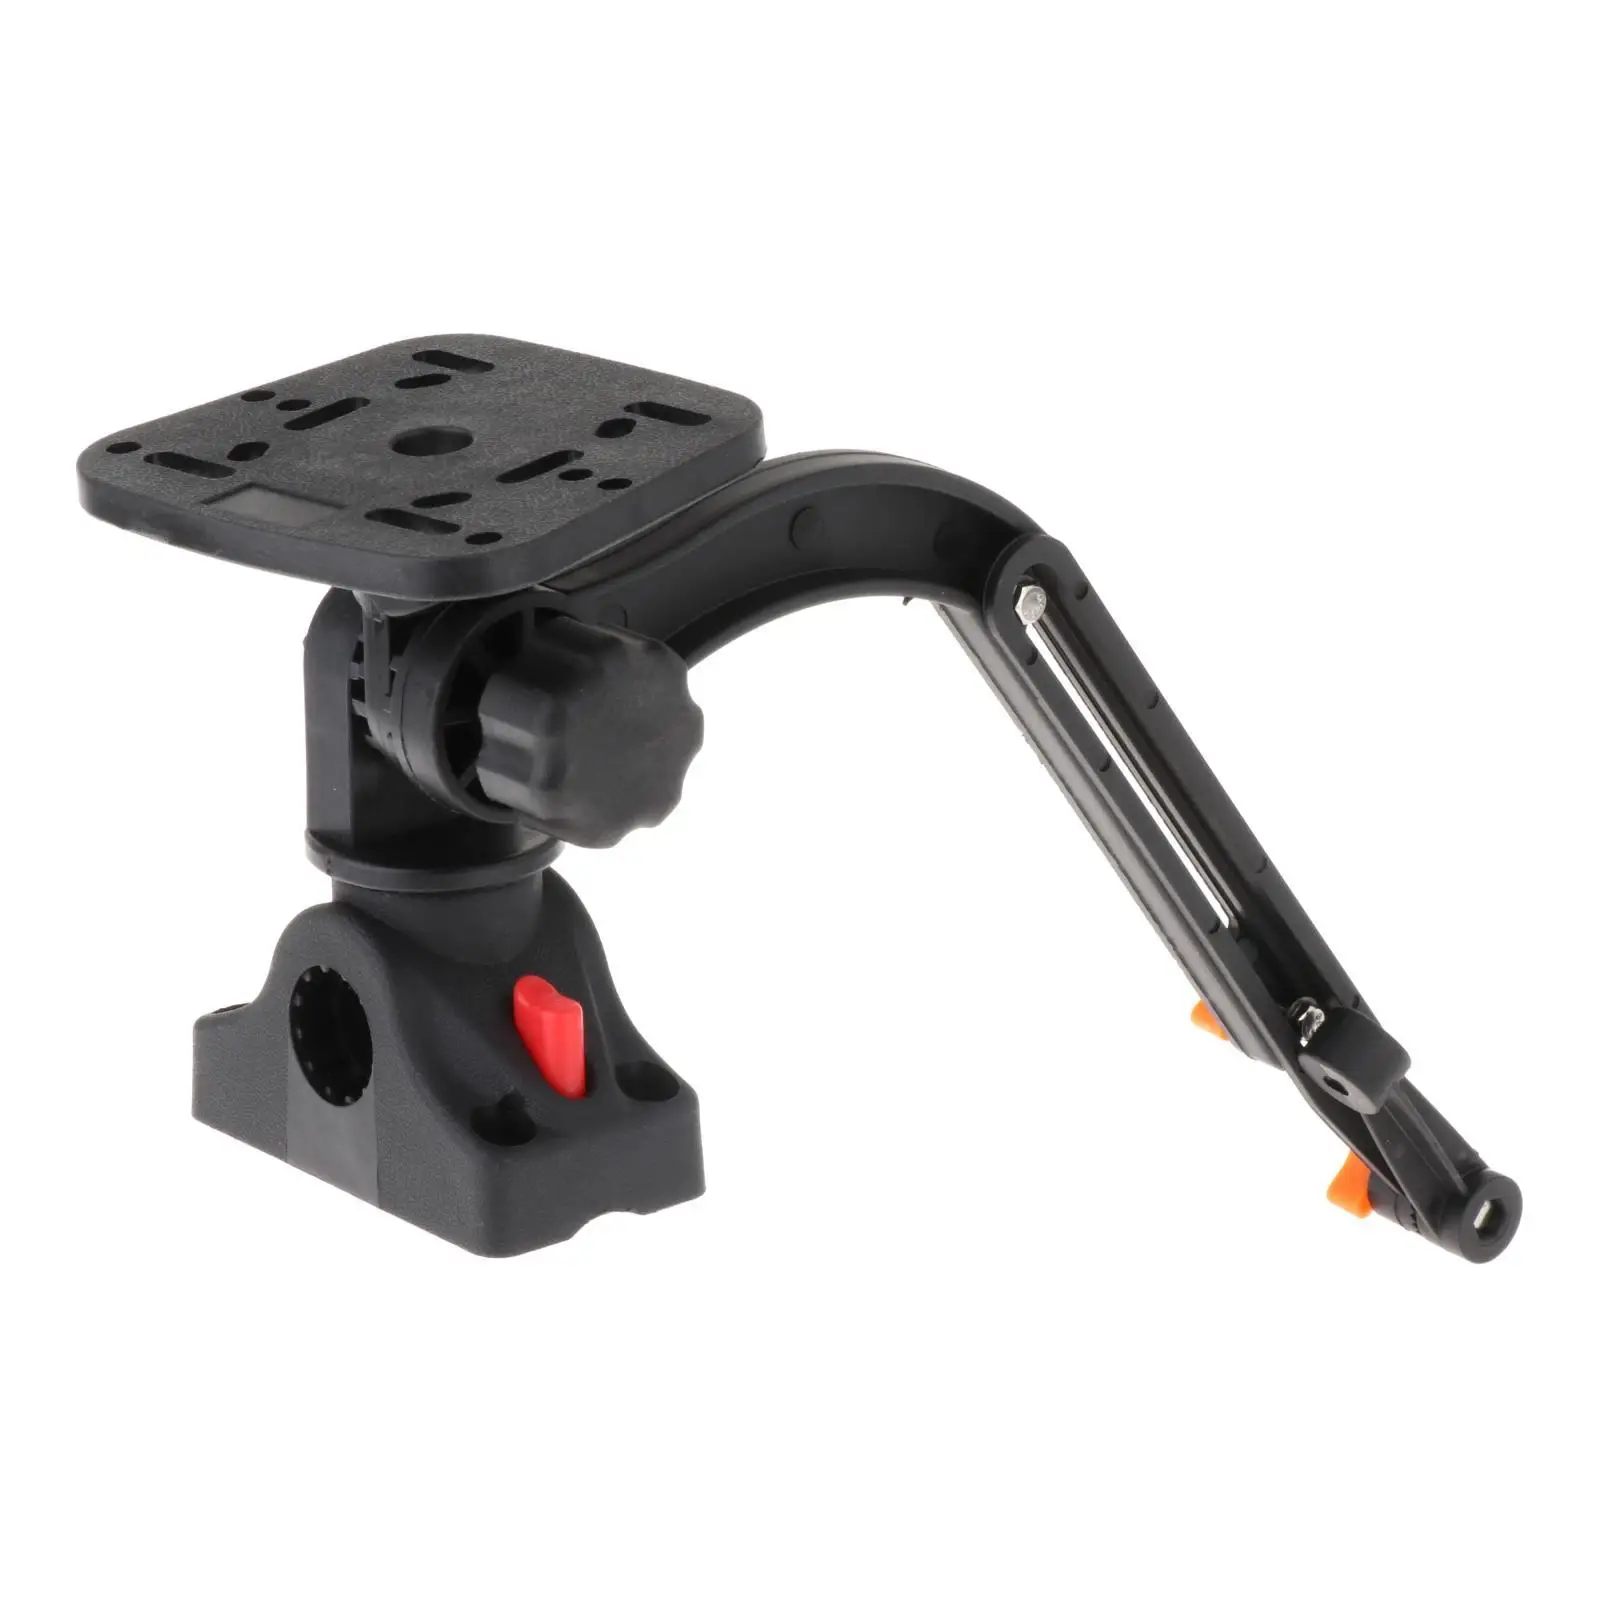 Fish Finder Mount Universal Mounting Plate Marine Electronic Fish Finder Mount Ball Base Ball Mount for Kayak Canoe Accessories